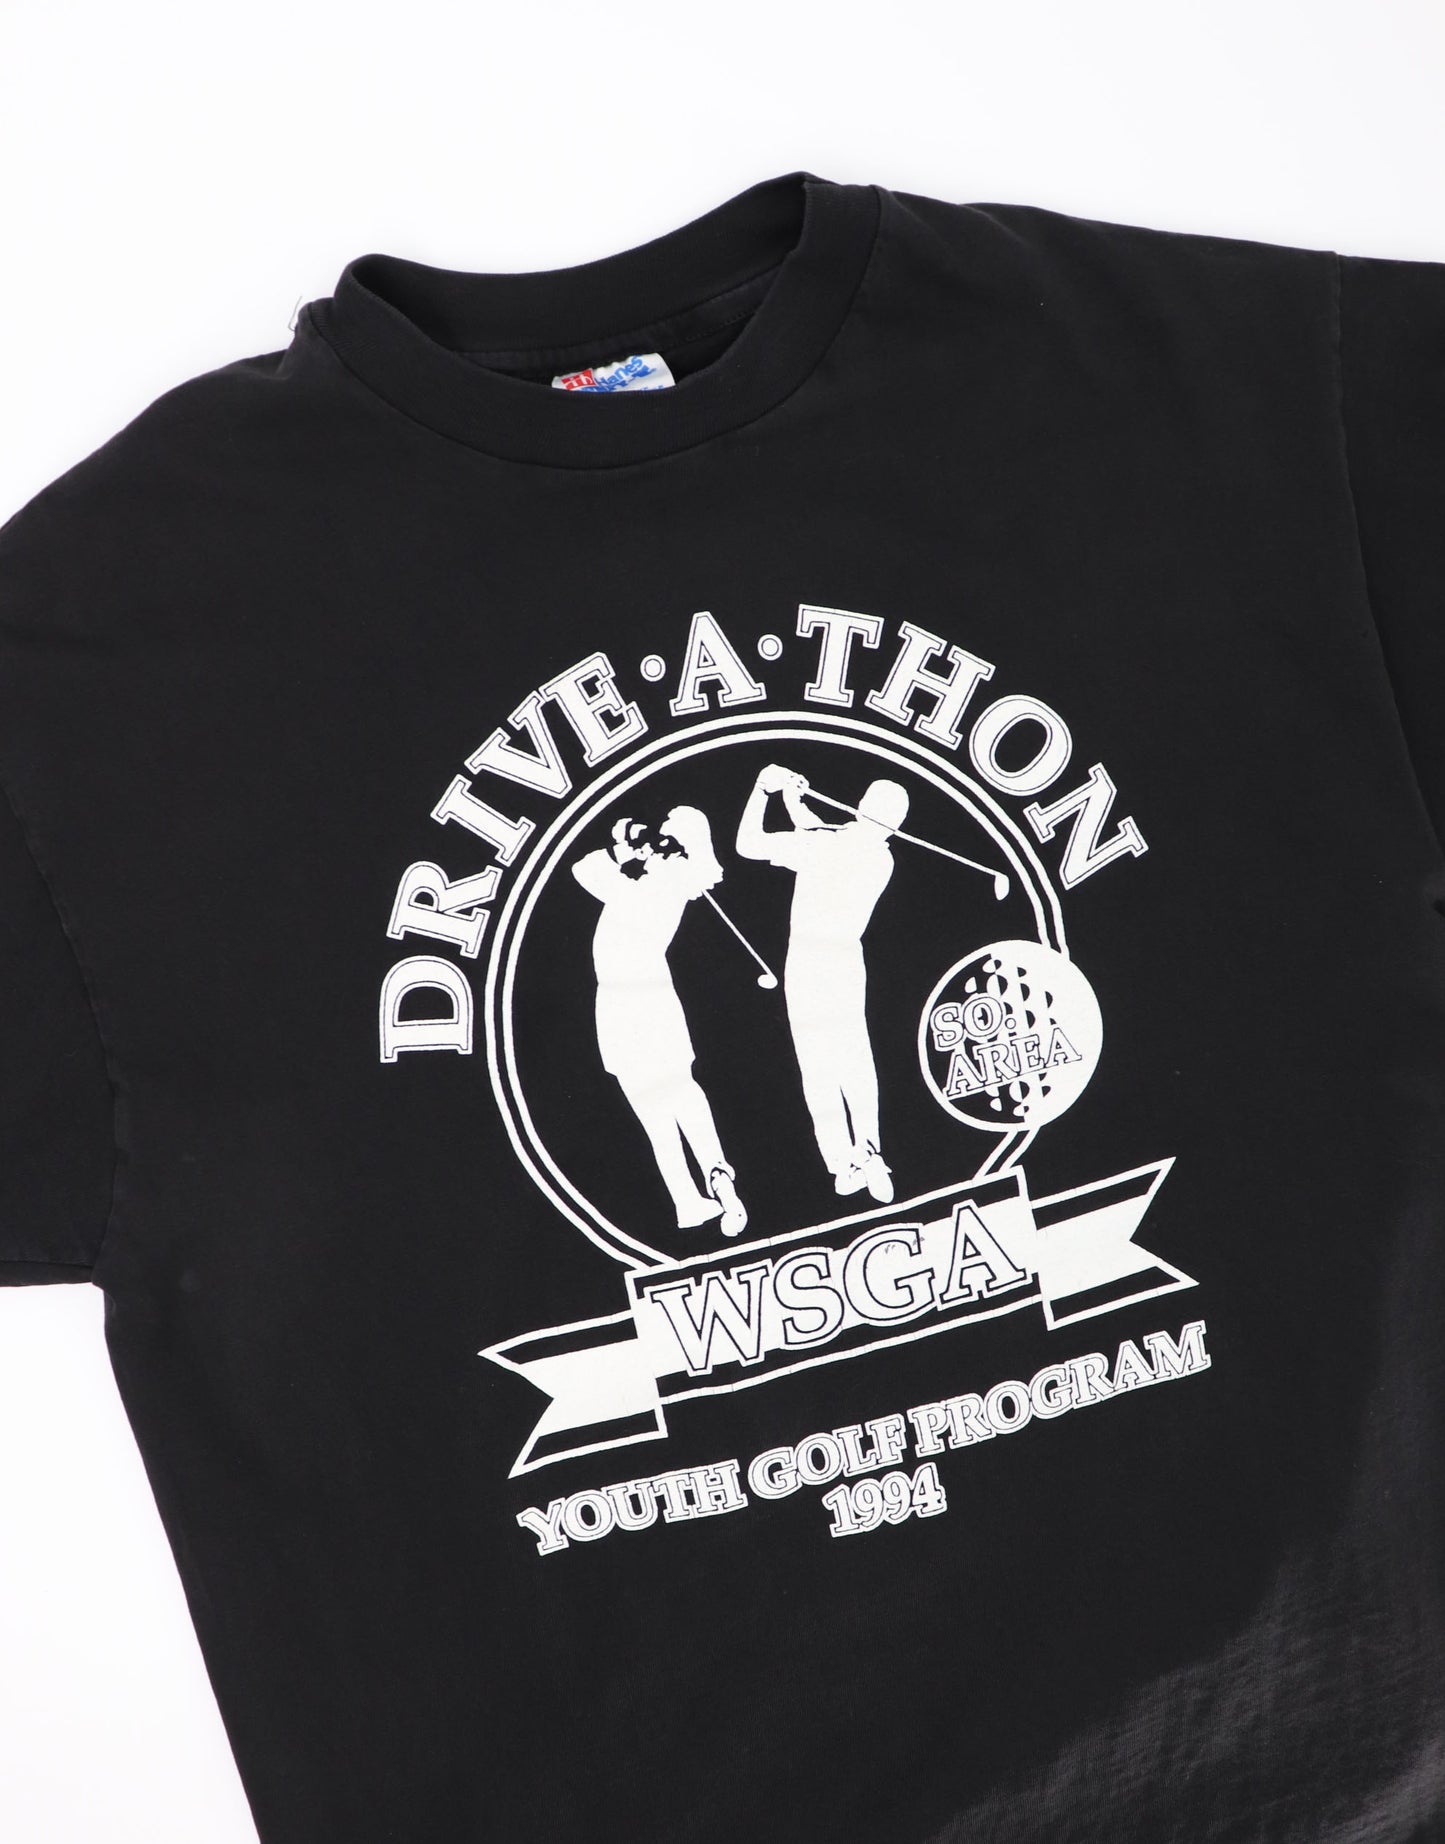 DRIVE A THON YOUTH GOLF 1994 MADE IN USA